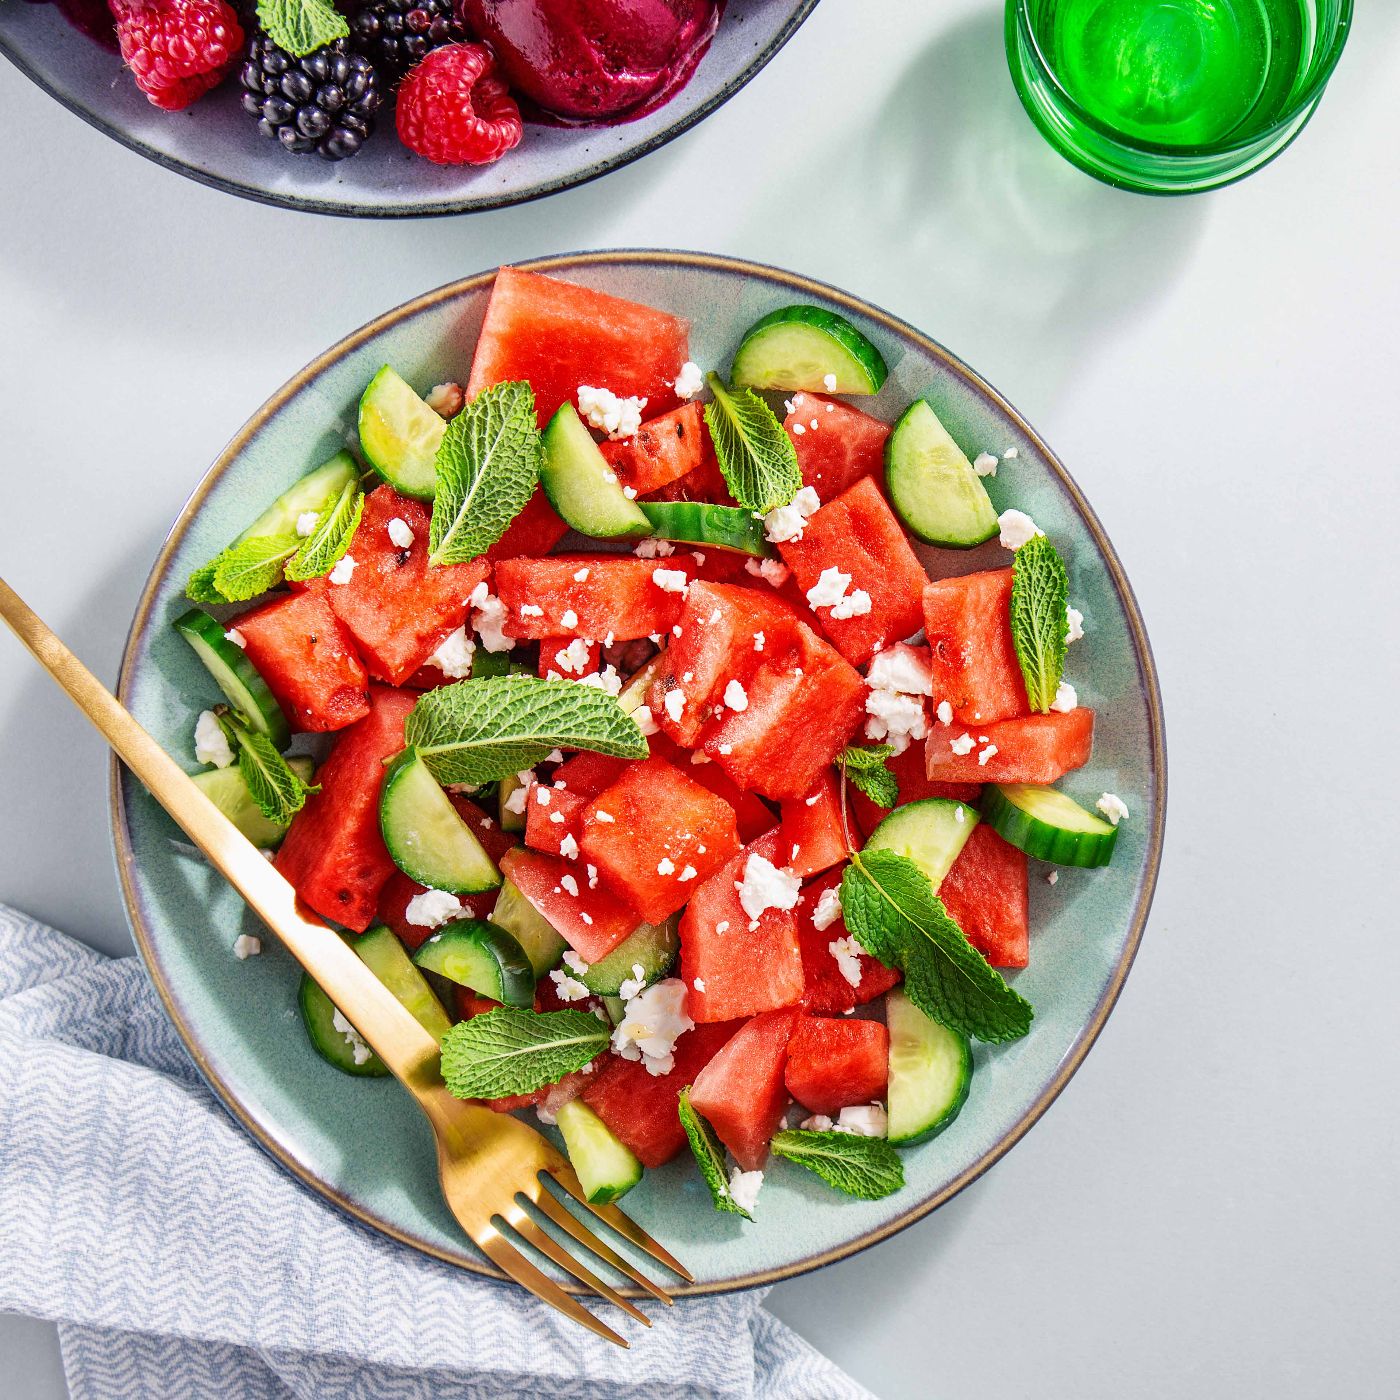 Summer-salads-with-watermelon-and-cucumbers-berries-and-ice-cream-1158288528_5755x3837-square.jpg